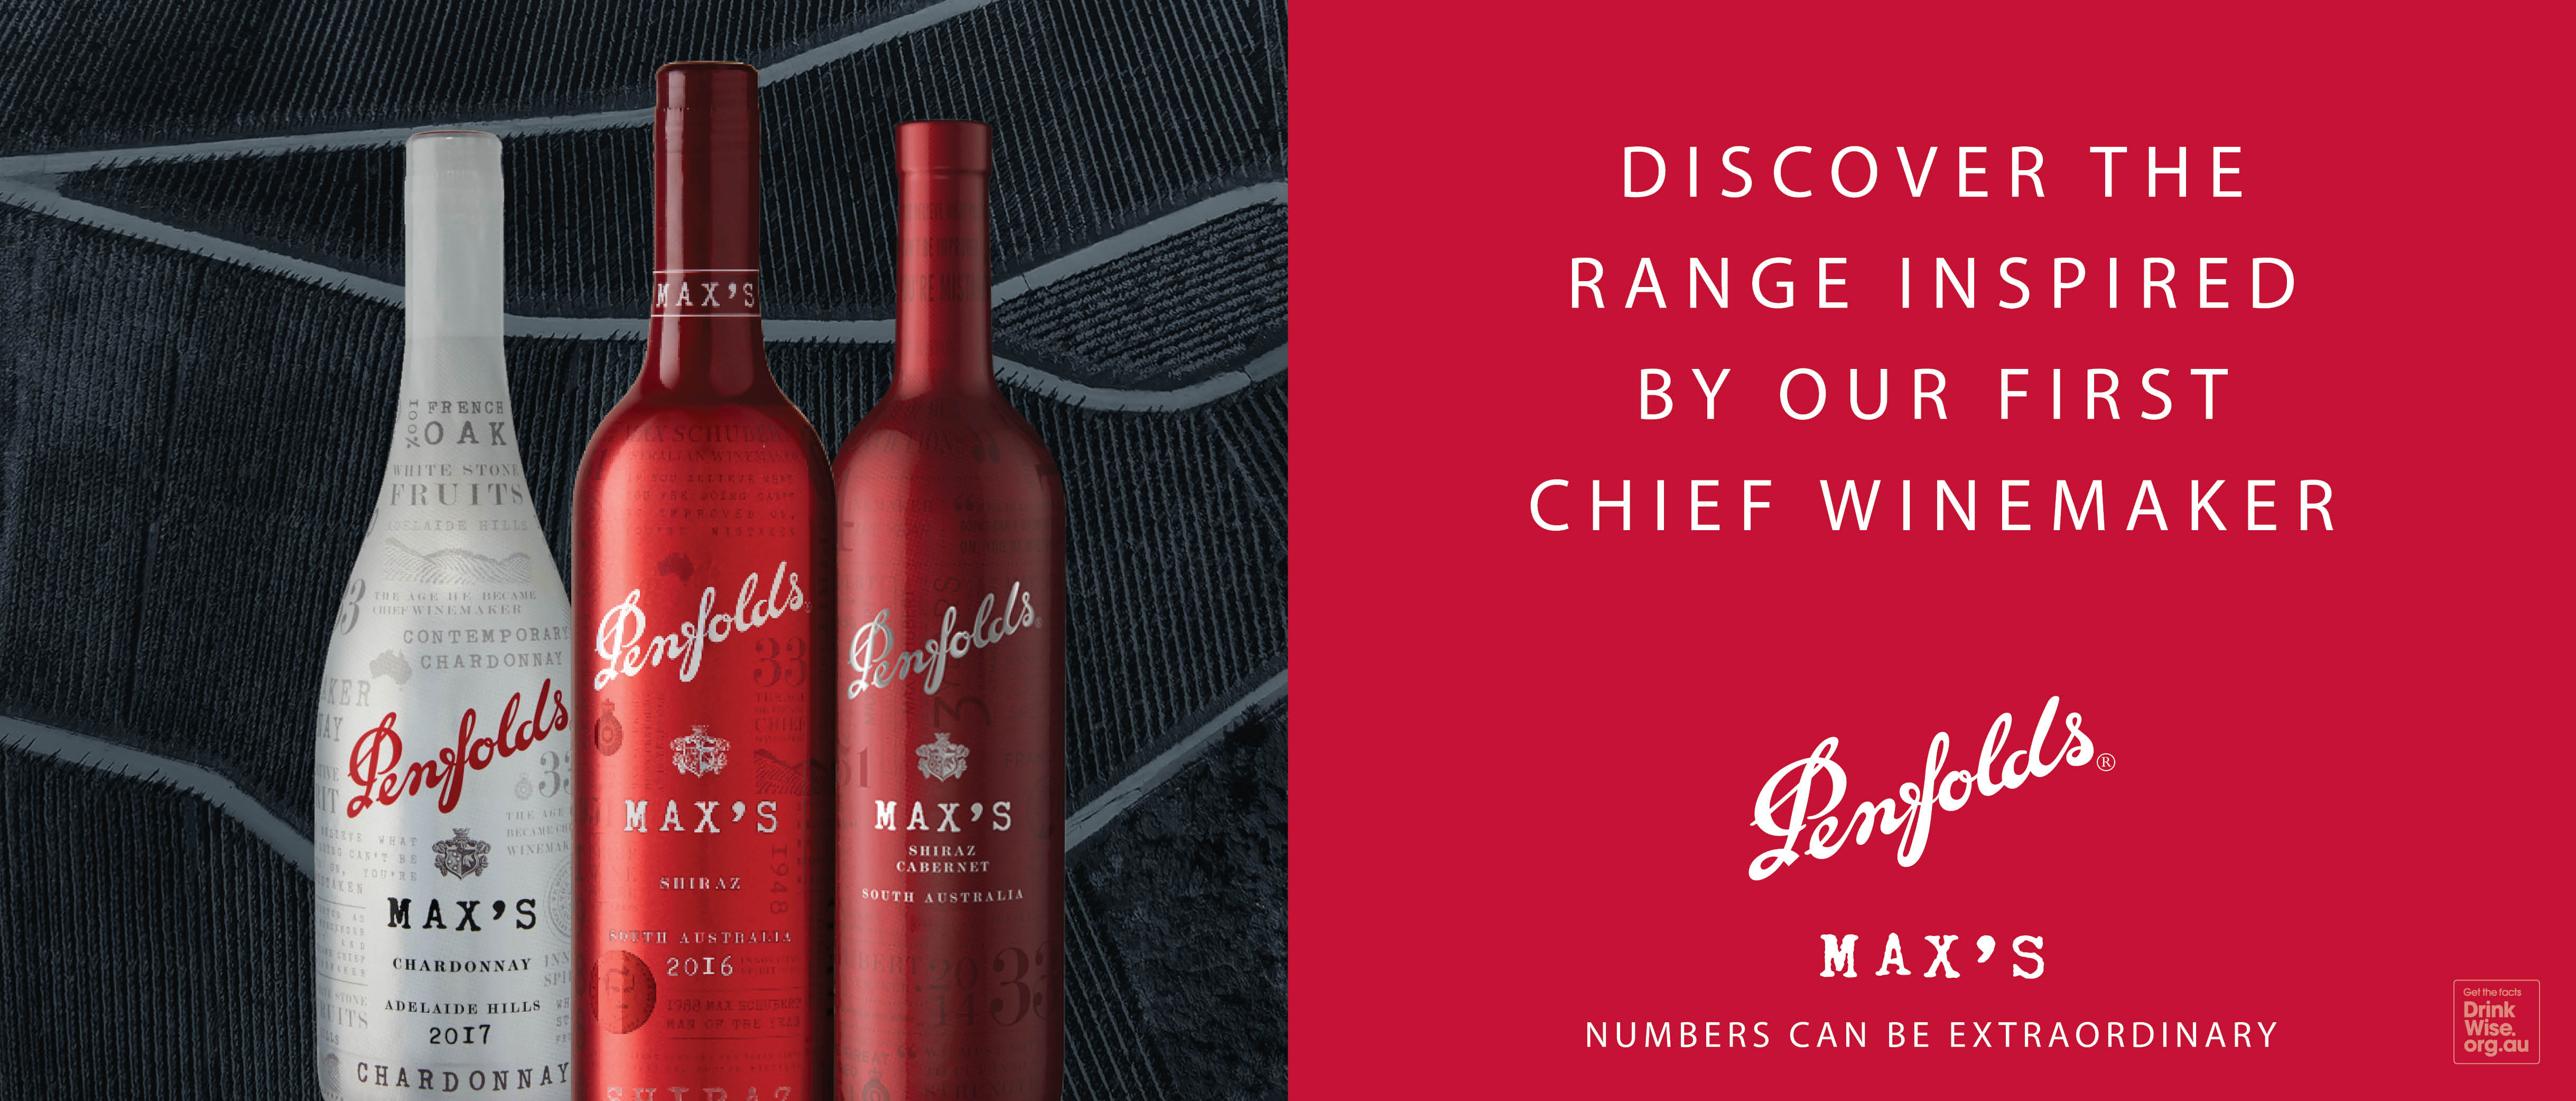 Max’s – Celebrating Penfolds First Chief Winemaker